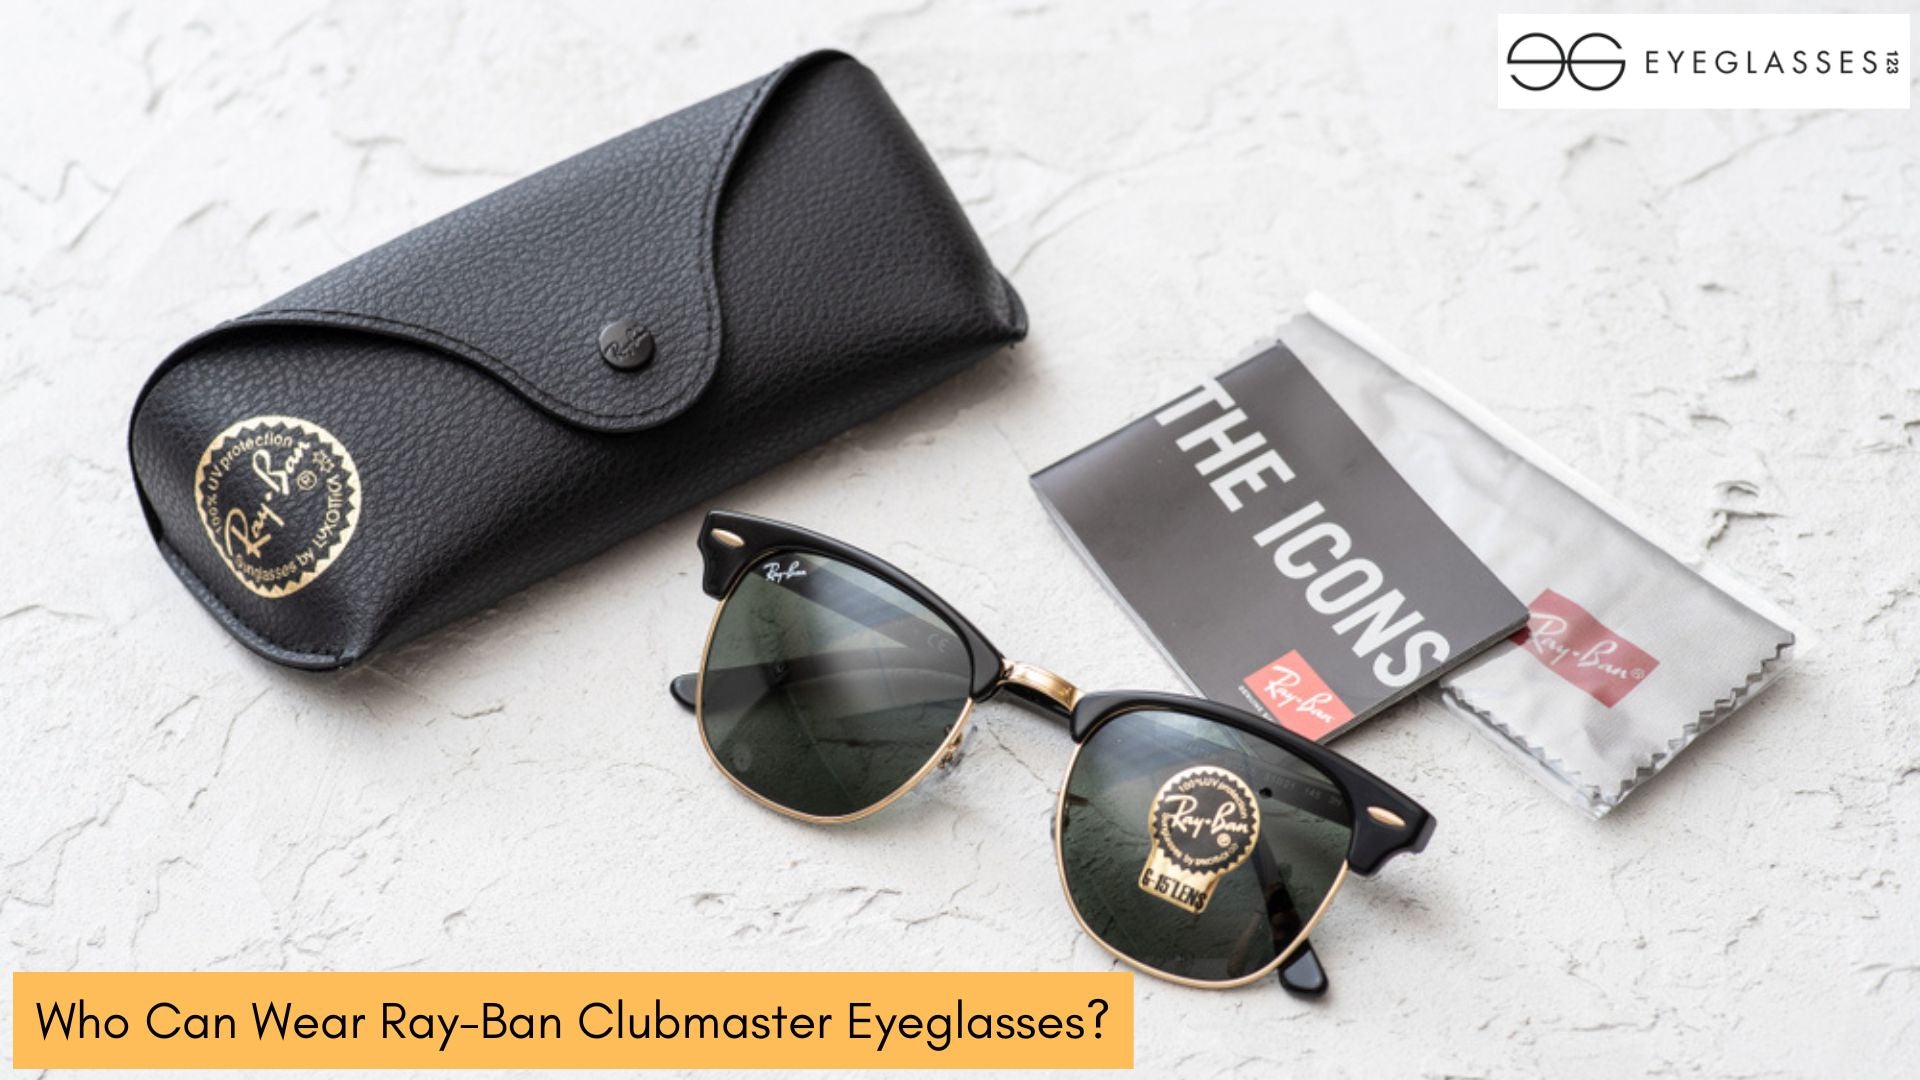 Who Can Wear Ray-Ban Clubmaster Eyeglasses?